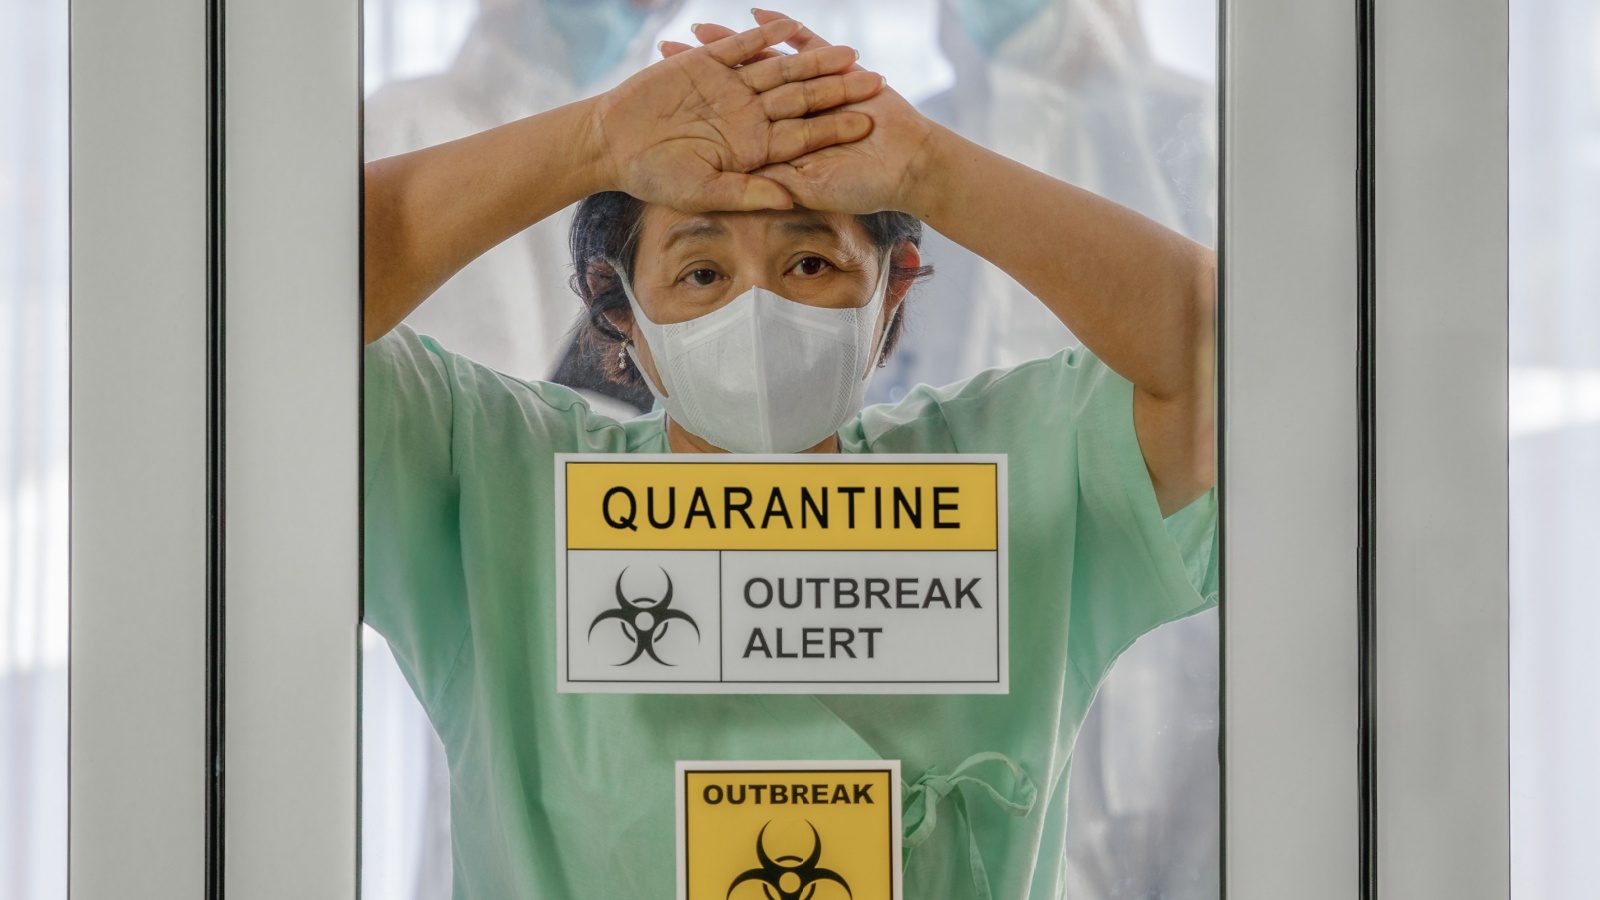 nfected patient in quarantine room with quarantine and outbreak alert sign at hospital with blurred disease control experts, coronavirus outbreak control